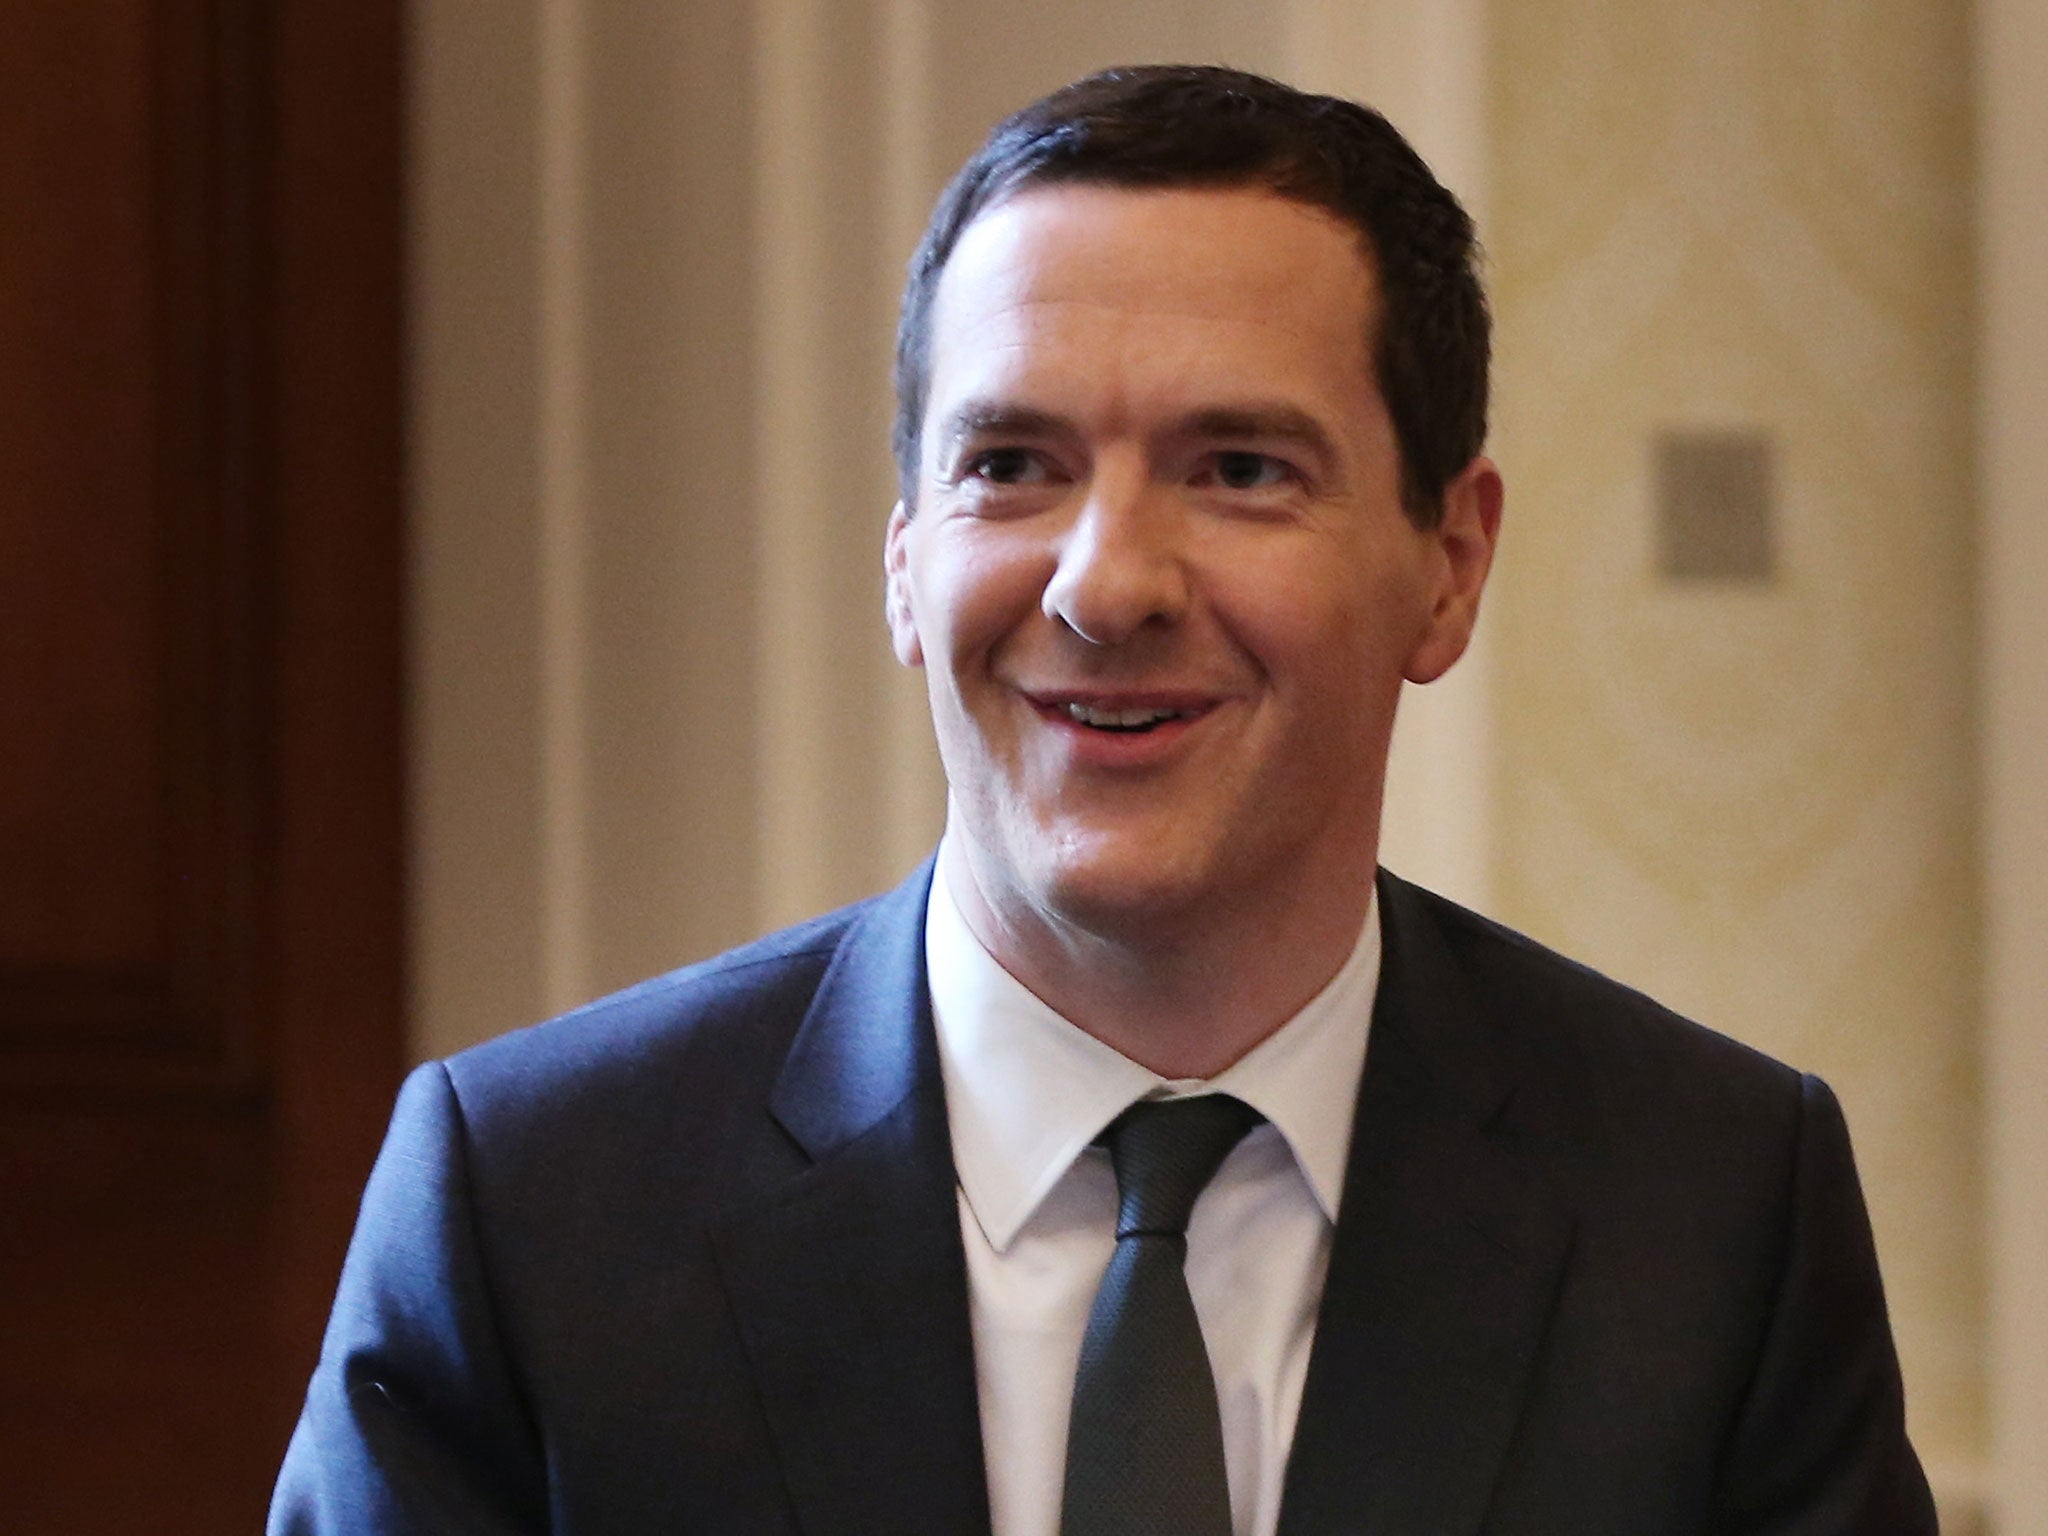 George Osborne says Britain wants to ‘play a leading role within a reformed EU’